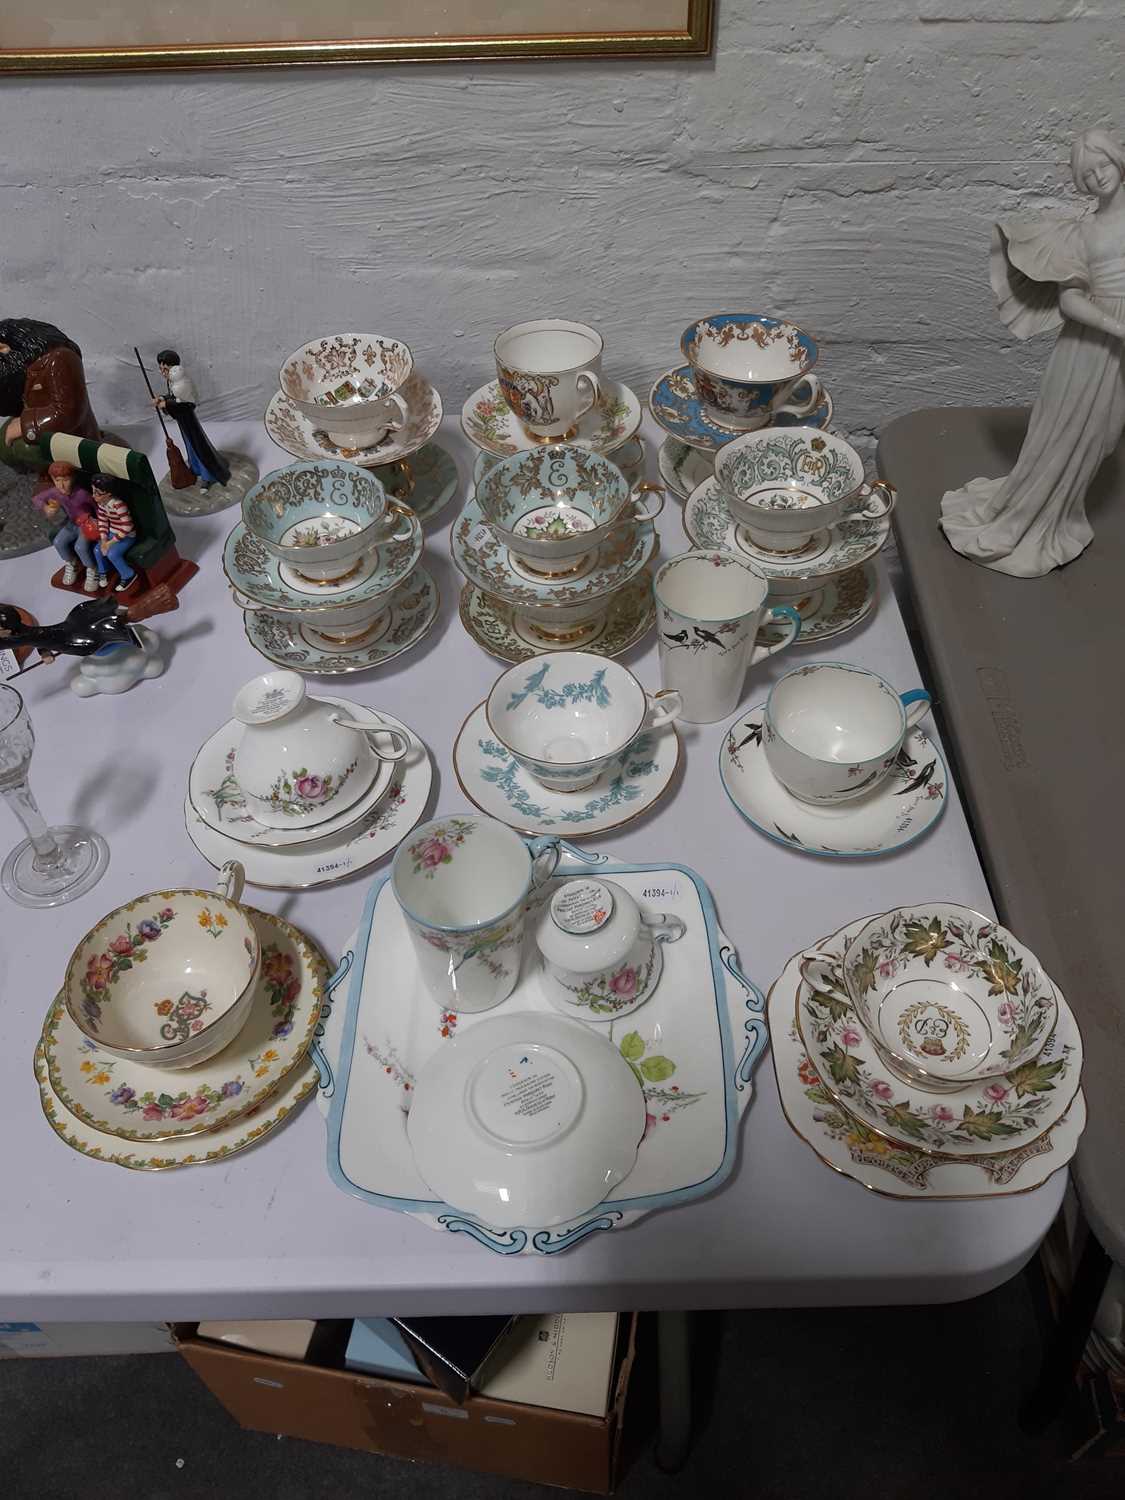 Collection of Royal commemorative Paragon teacups and saucers - Image 2 of 2